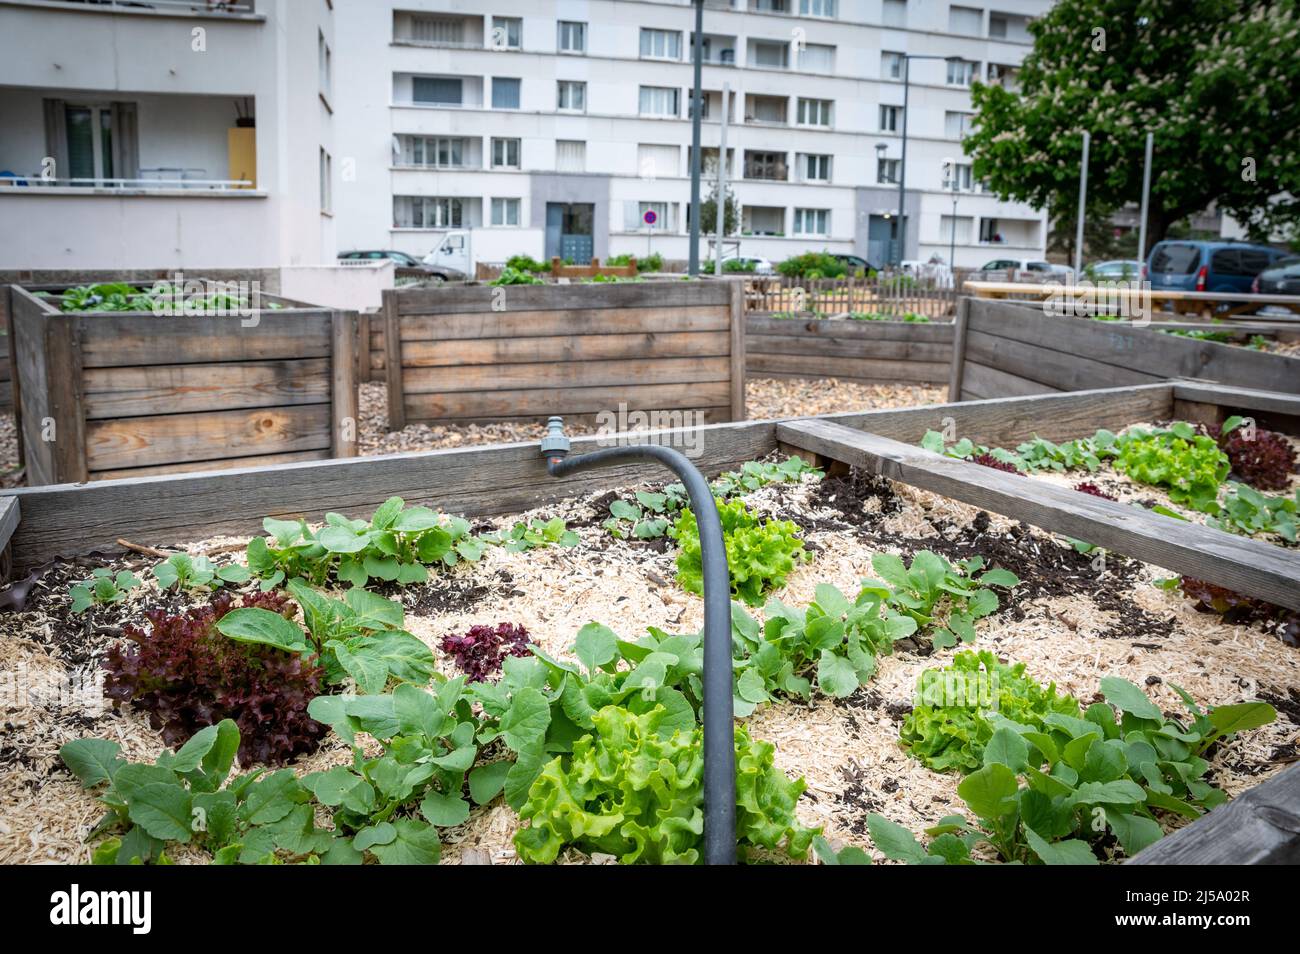 Gardening vegetable container. Vegetable garden on the terrace. Salads growing in a container in an urban neighborhood Stock Photo